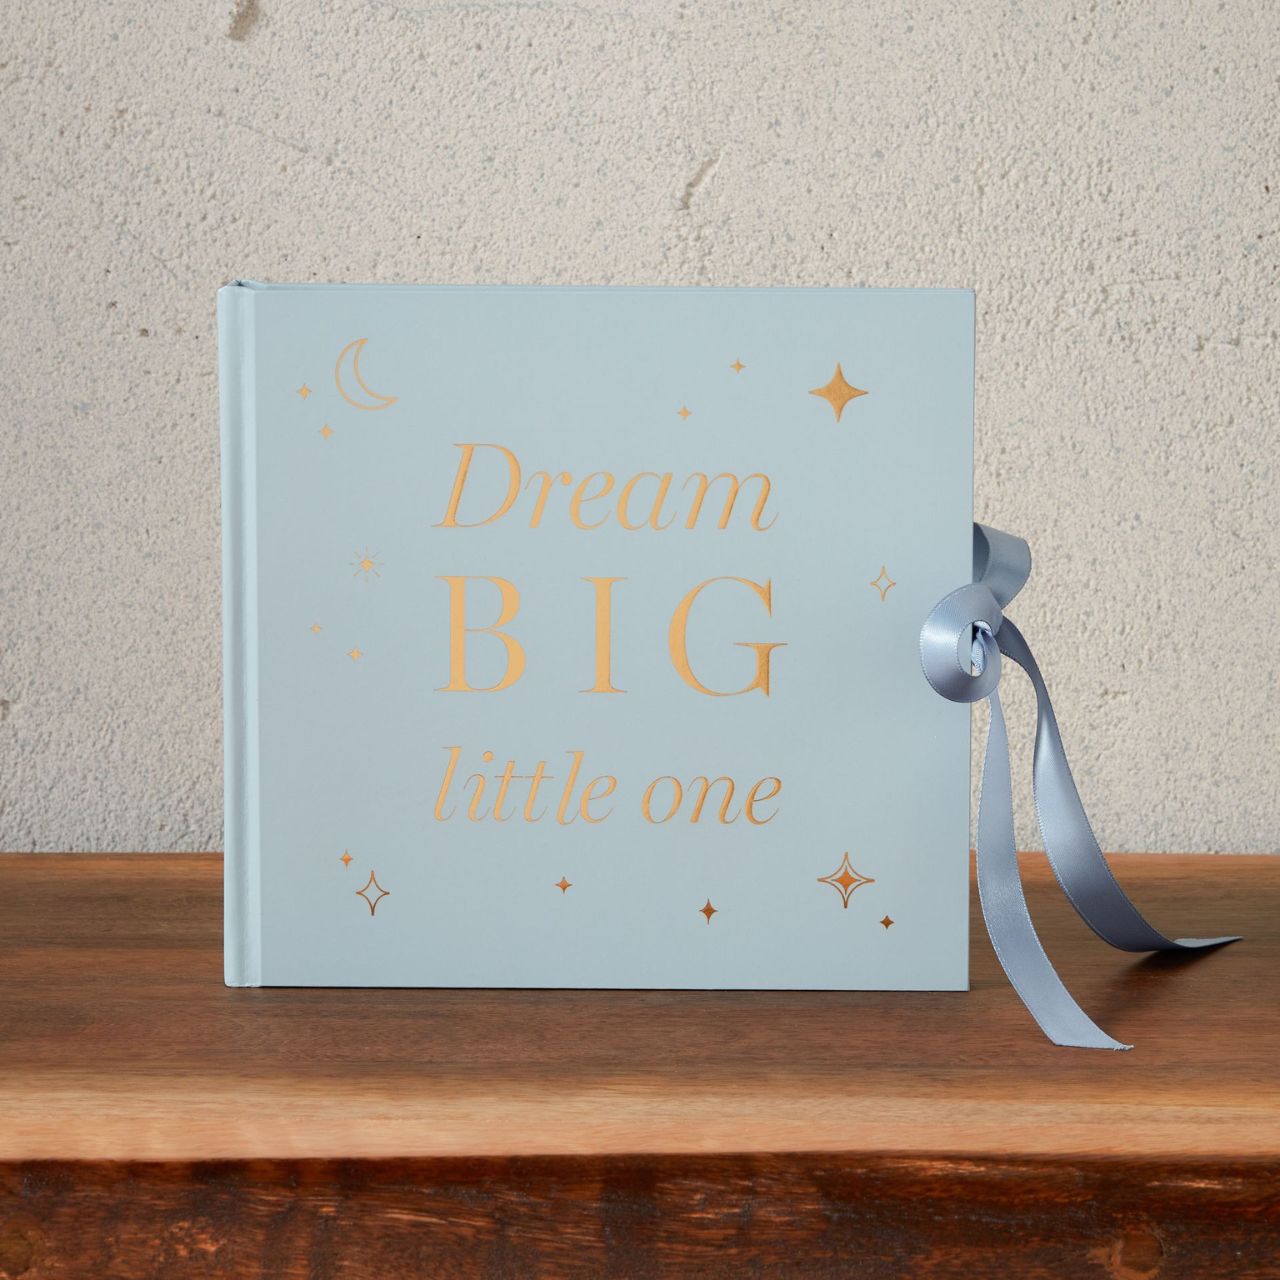 Bambino Photo Album "Dream Big" Blue  A photo album from BAMBINO BY JULIANA.  This alluring keepsake is an elegant way to preserve beloved memories of new family arrivals over the years.